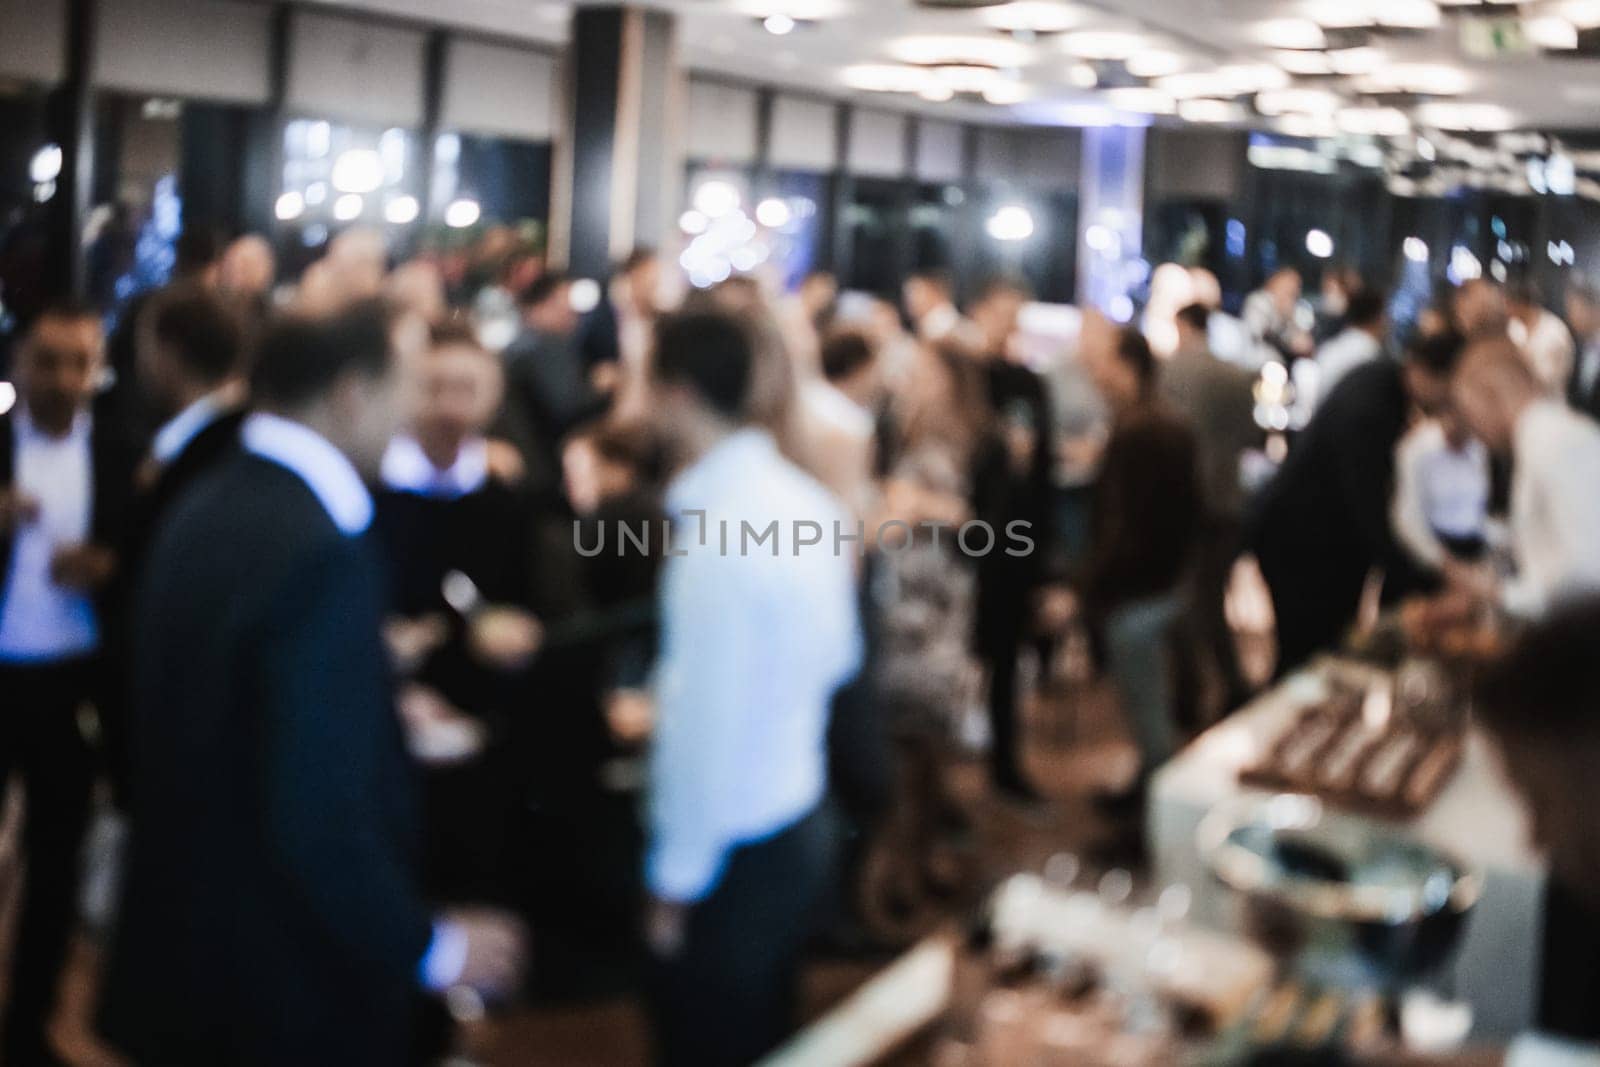 Blurred image of businesspeople at banquet event business meeting event. Business and entrepreneurship events concept.